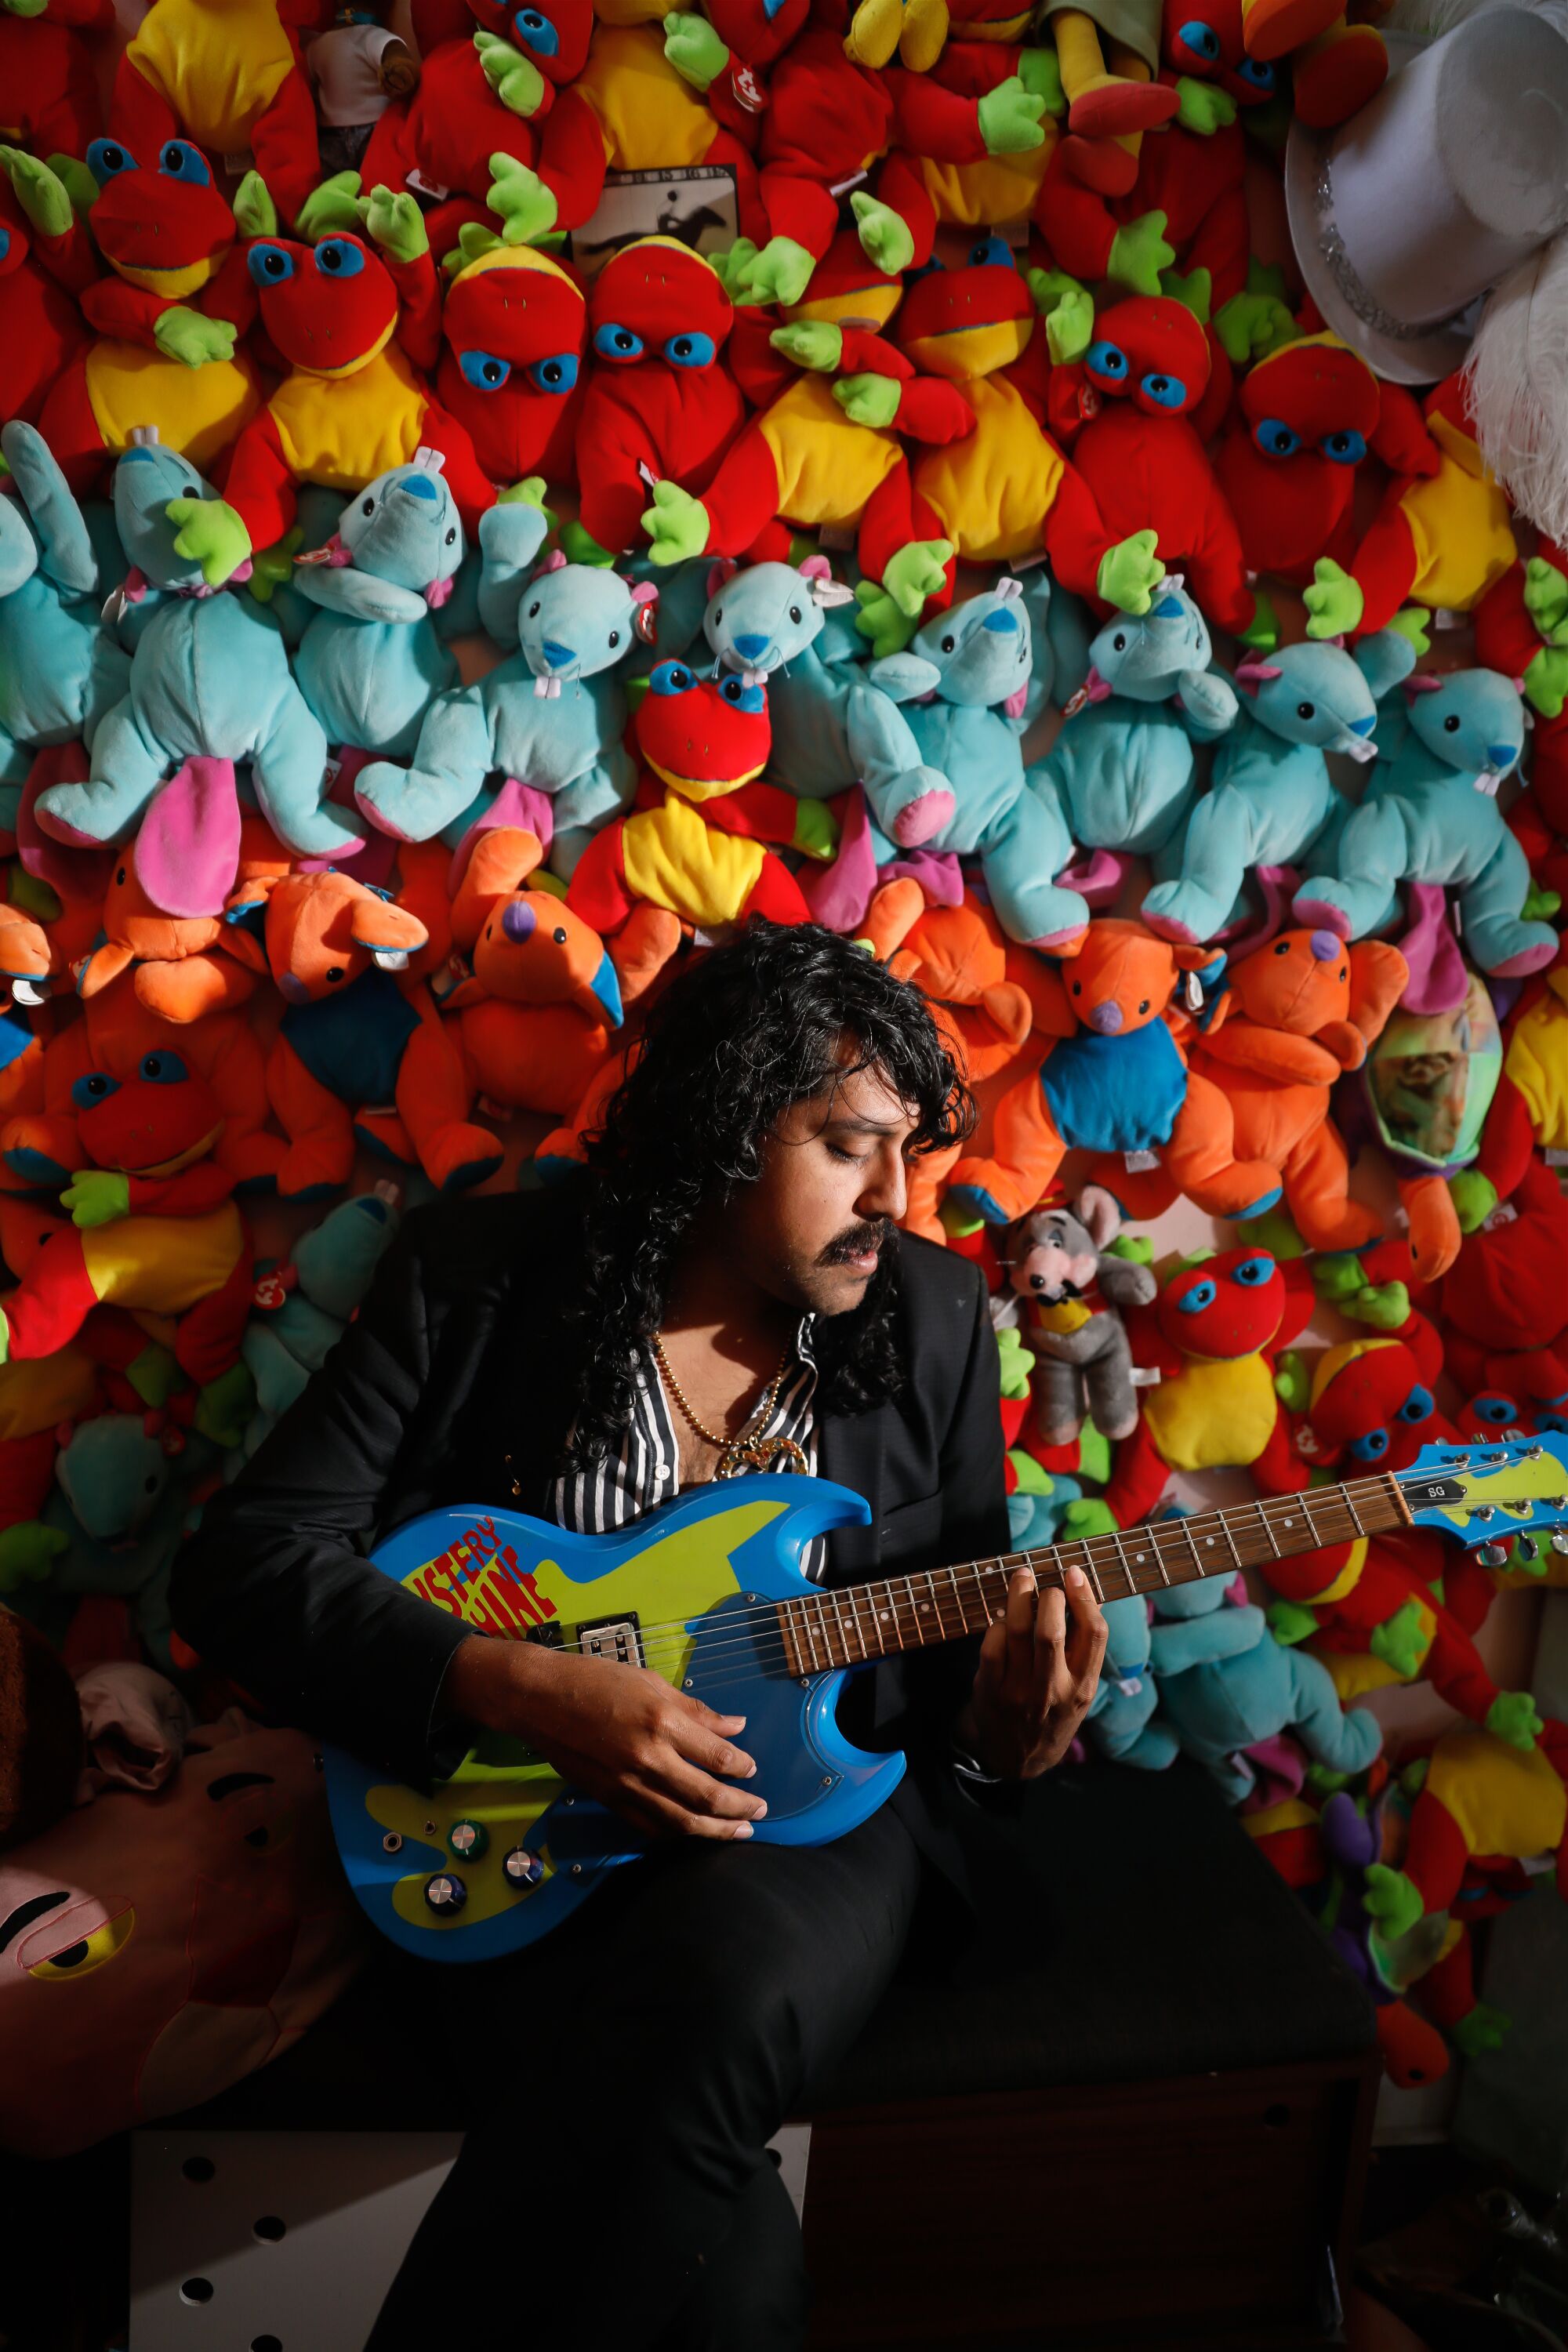 Enrique Tena Padilla (aka DJ Escuby), in a black suit, strums a guitar before a wall covered in Beanie Babies.